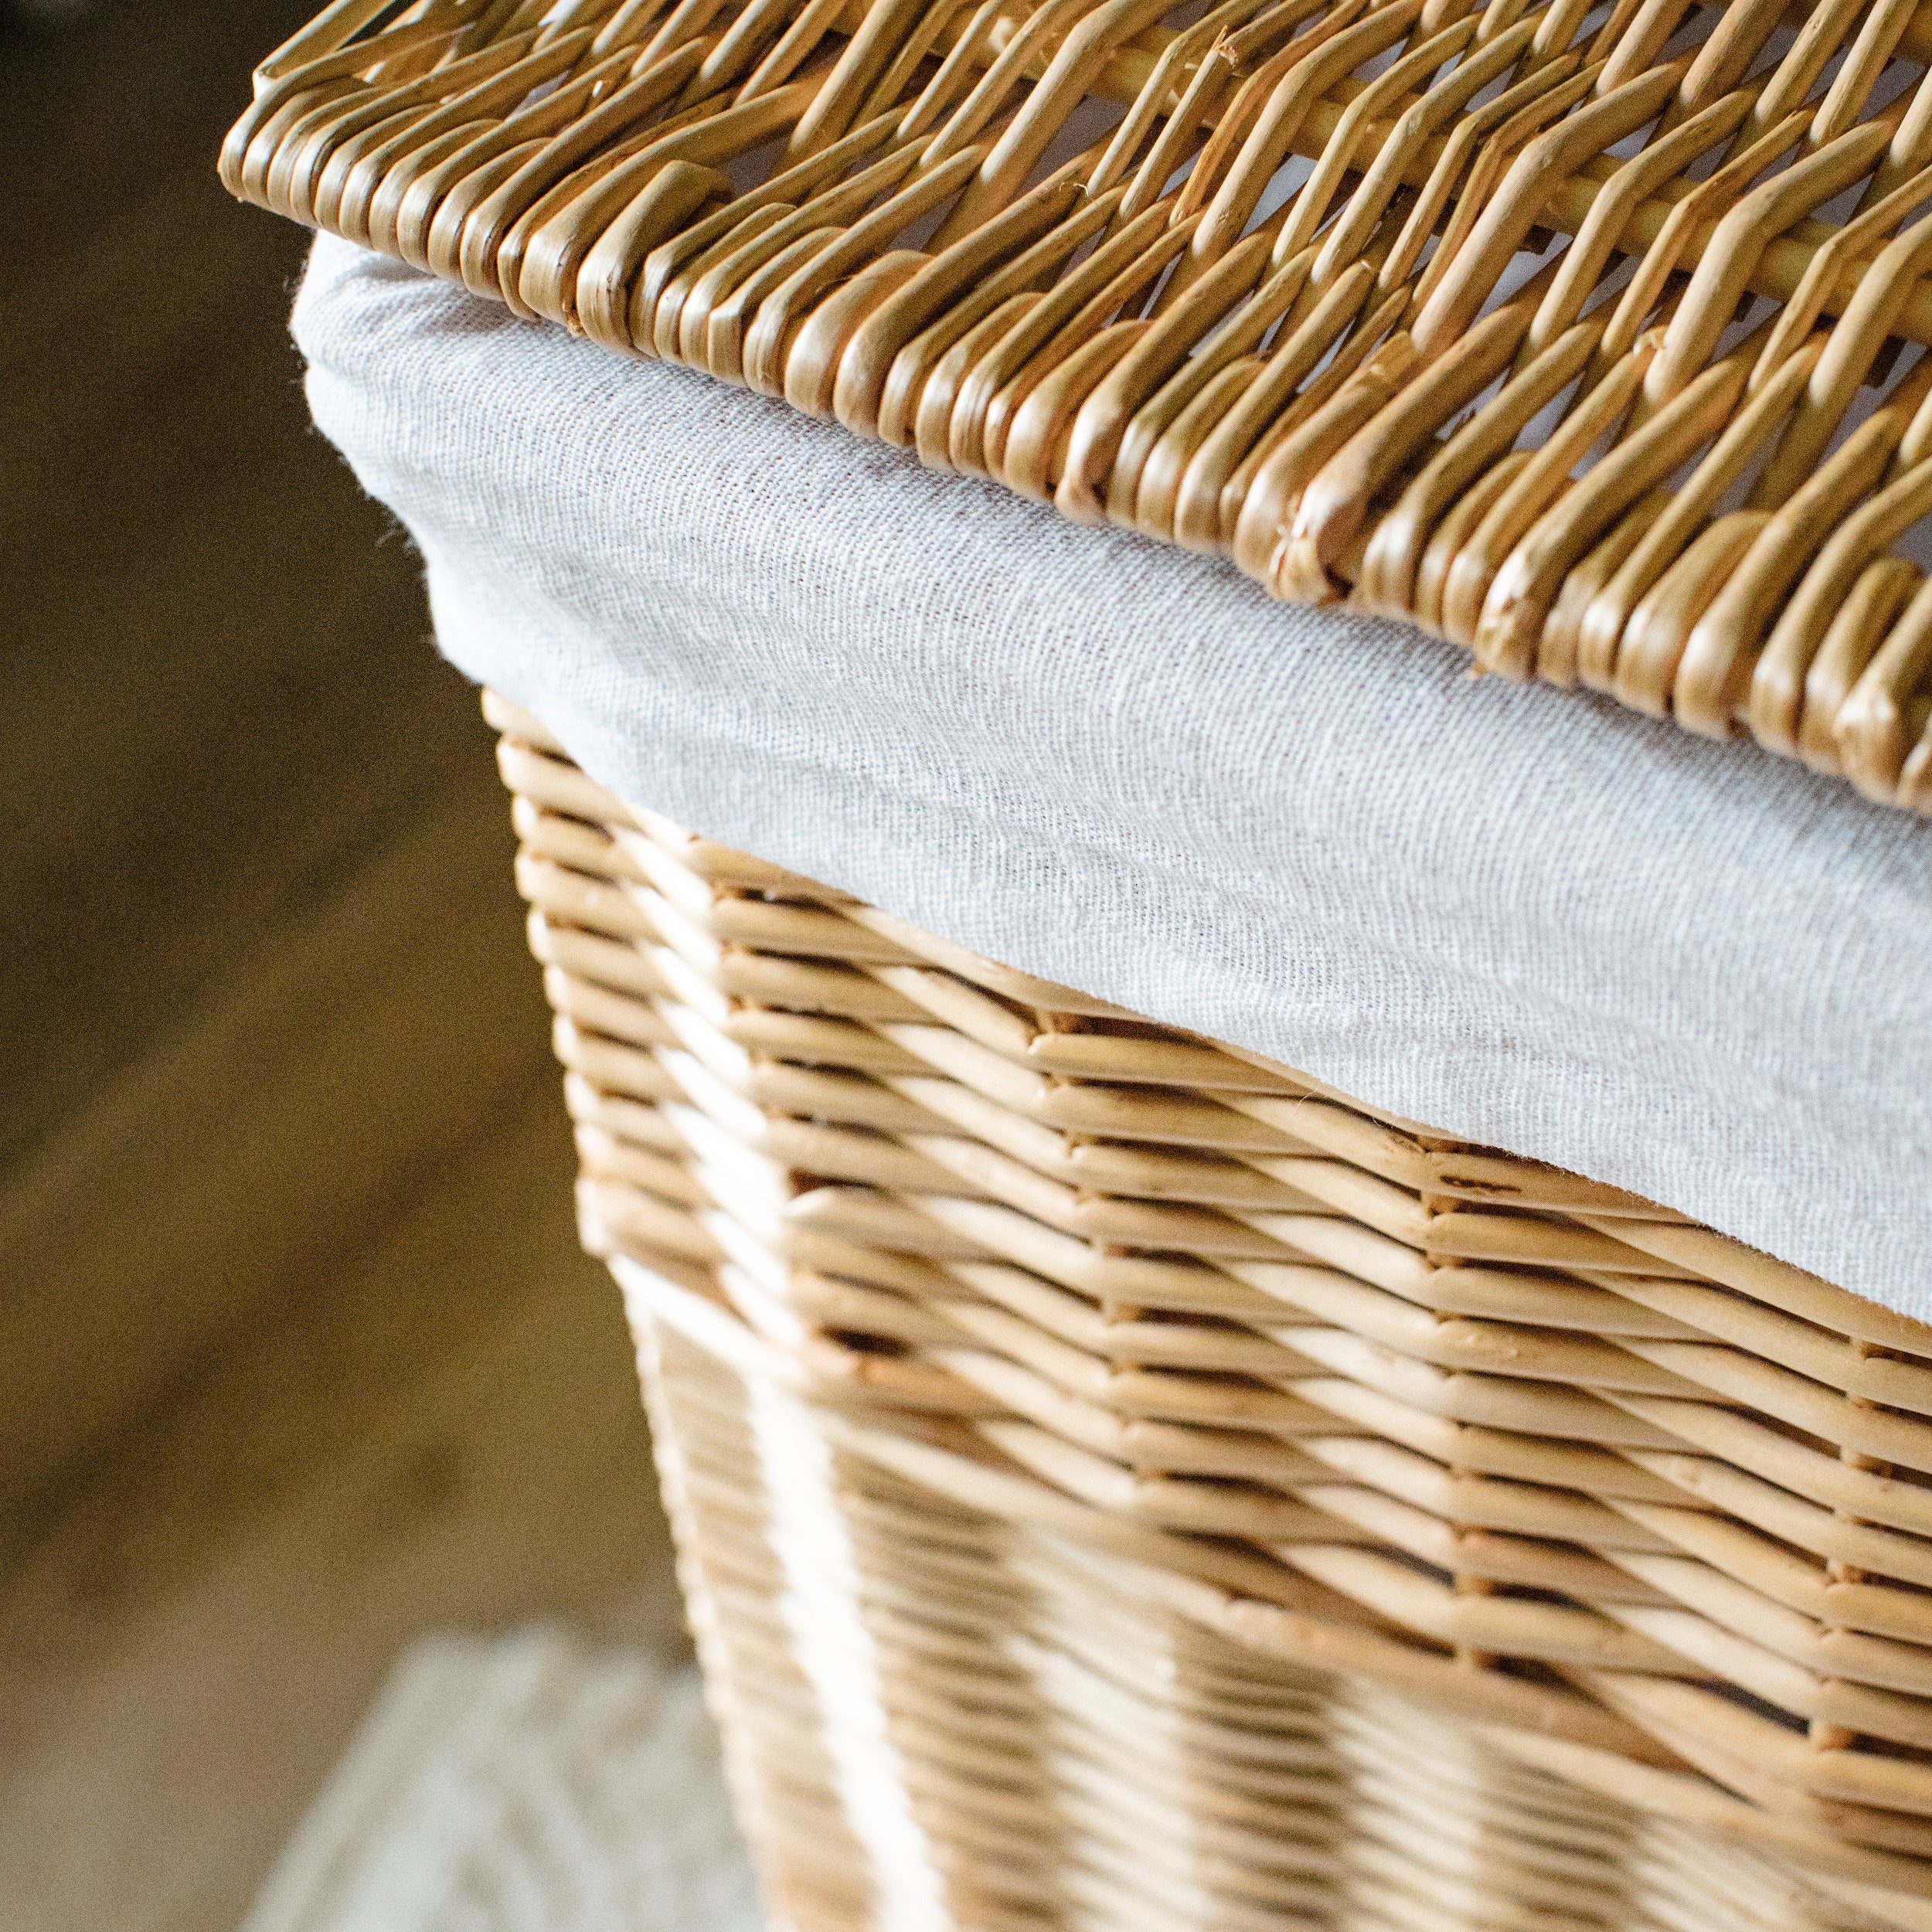 Natural Wicker Laundry Basket